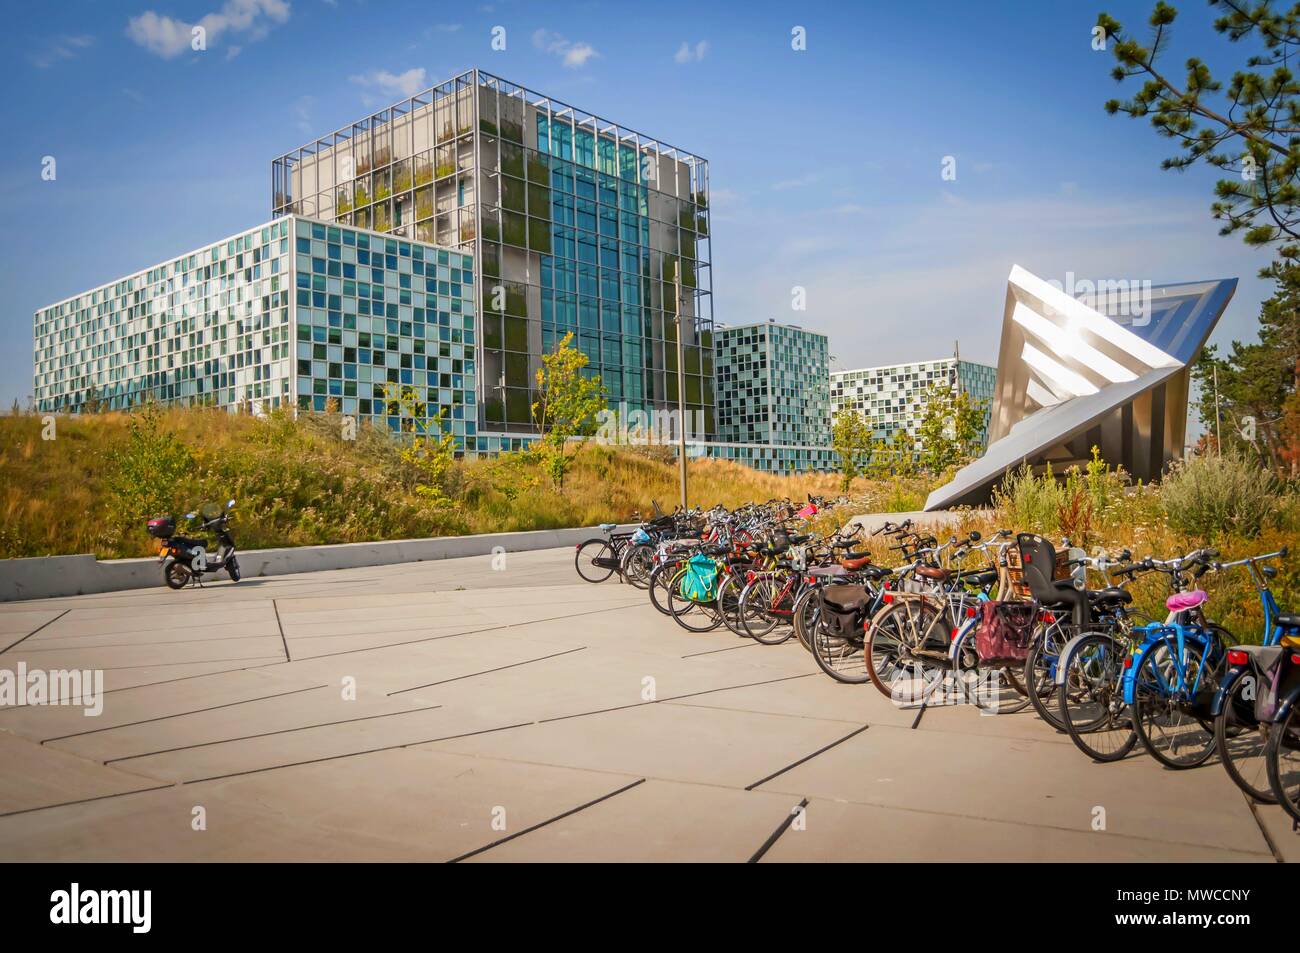 THE HAGUE, HOLLAND. July 19, 2017. Bicycles parked by the International Criminal Court (ICC) in Hague, Netherlands. Stock Photo